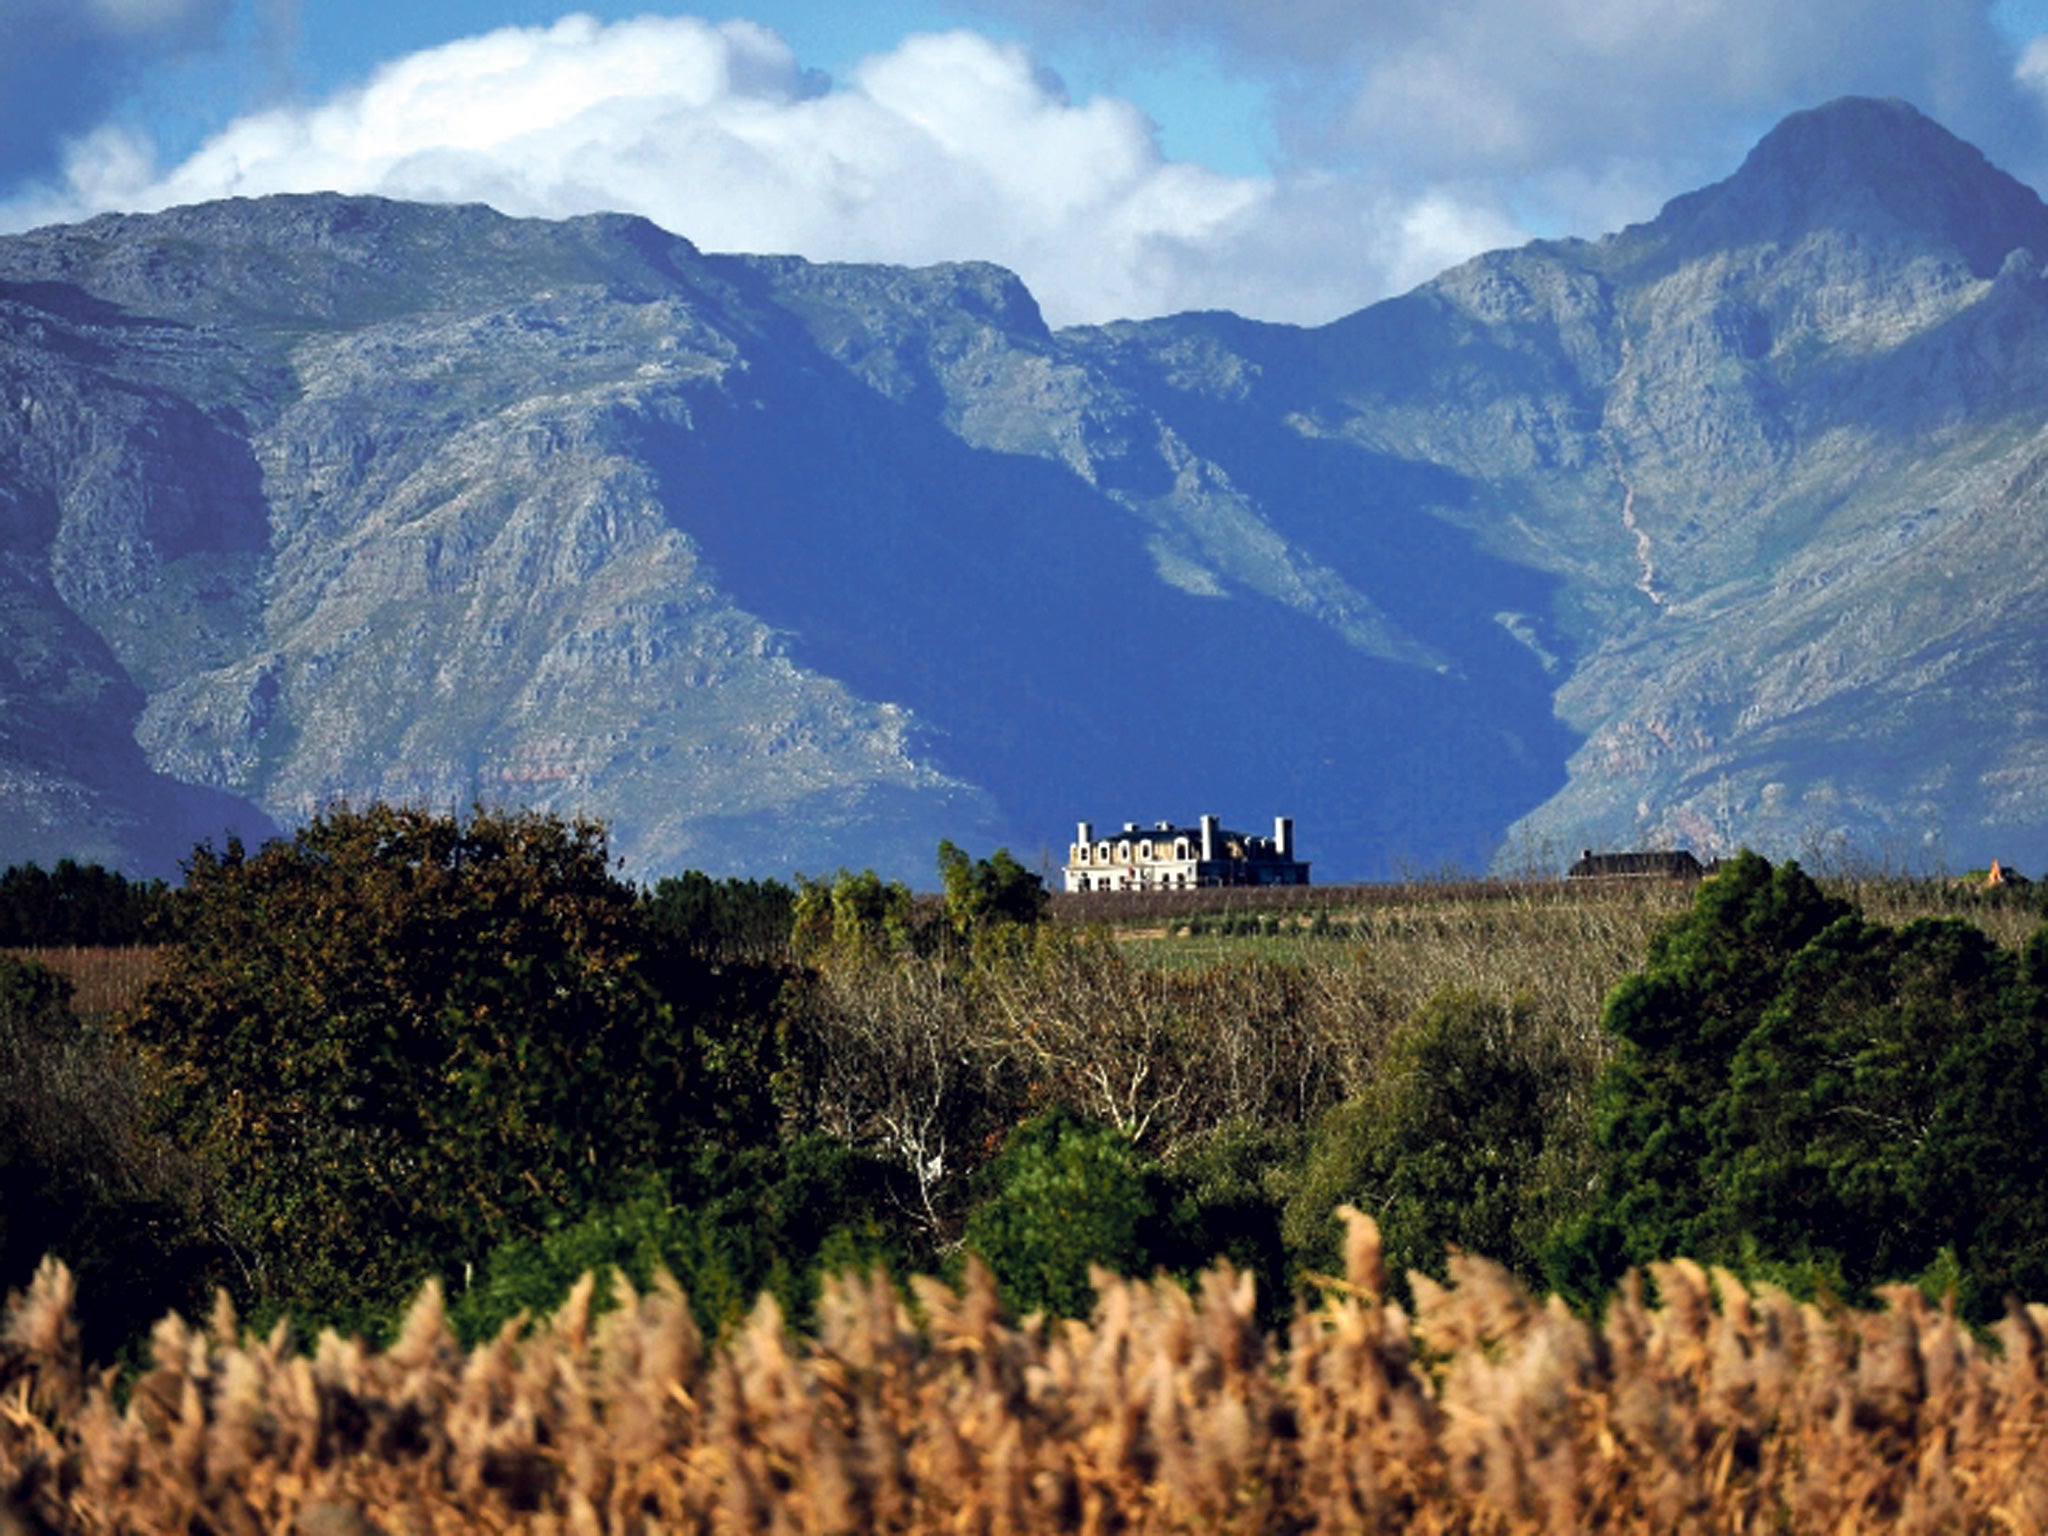 Vintage view: the winelands of Stellenbosch in South Africa